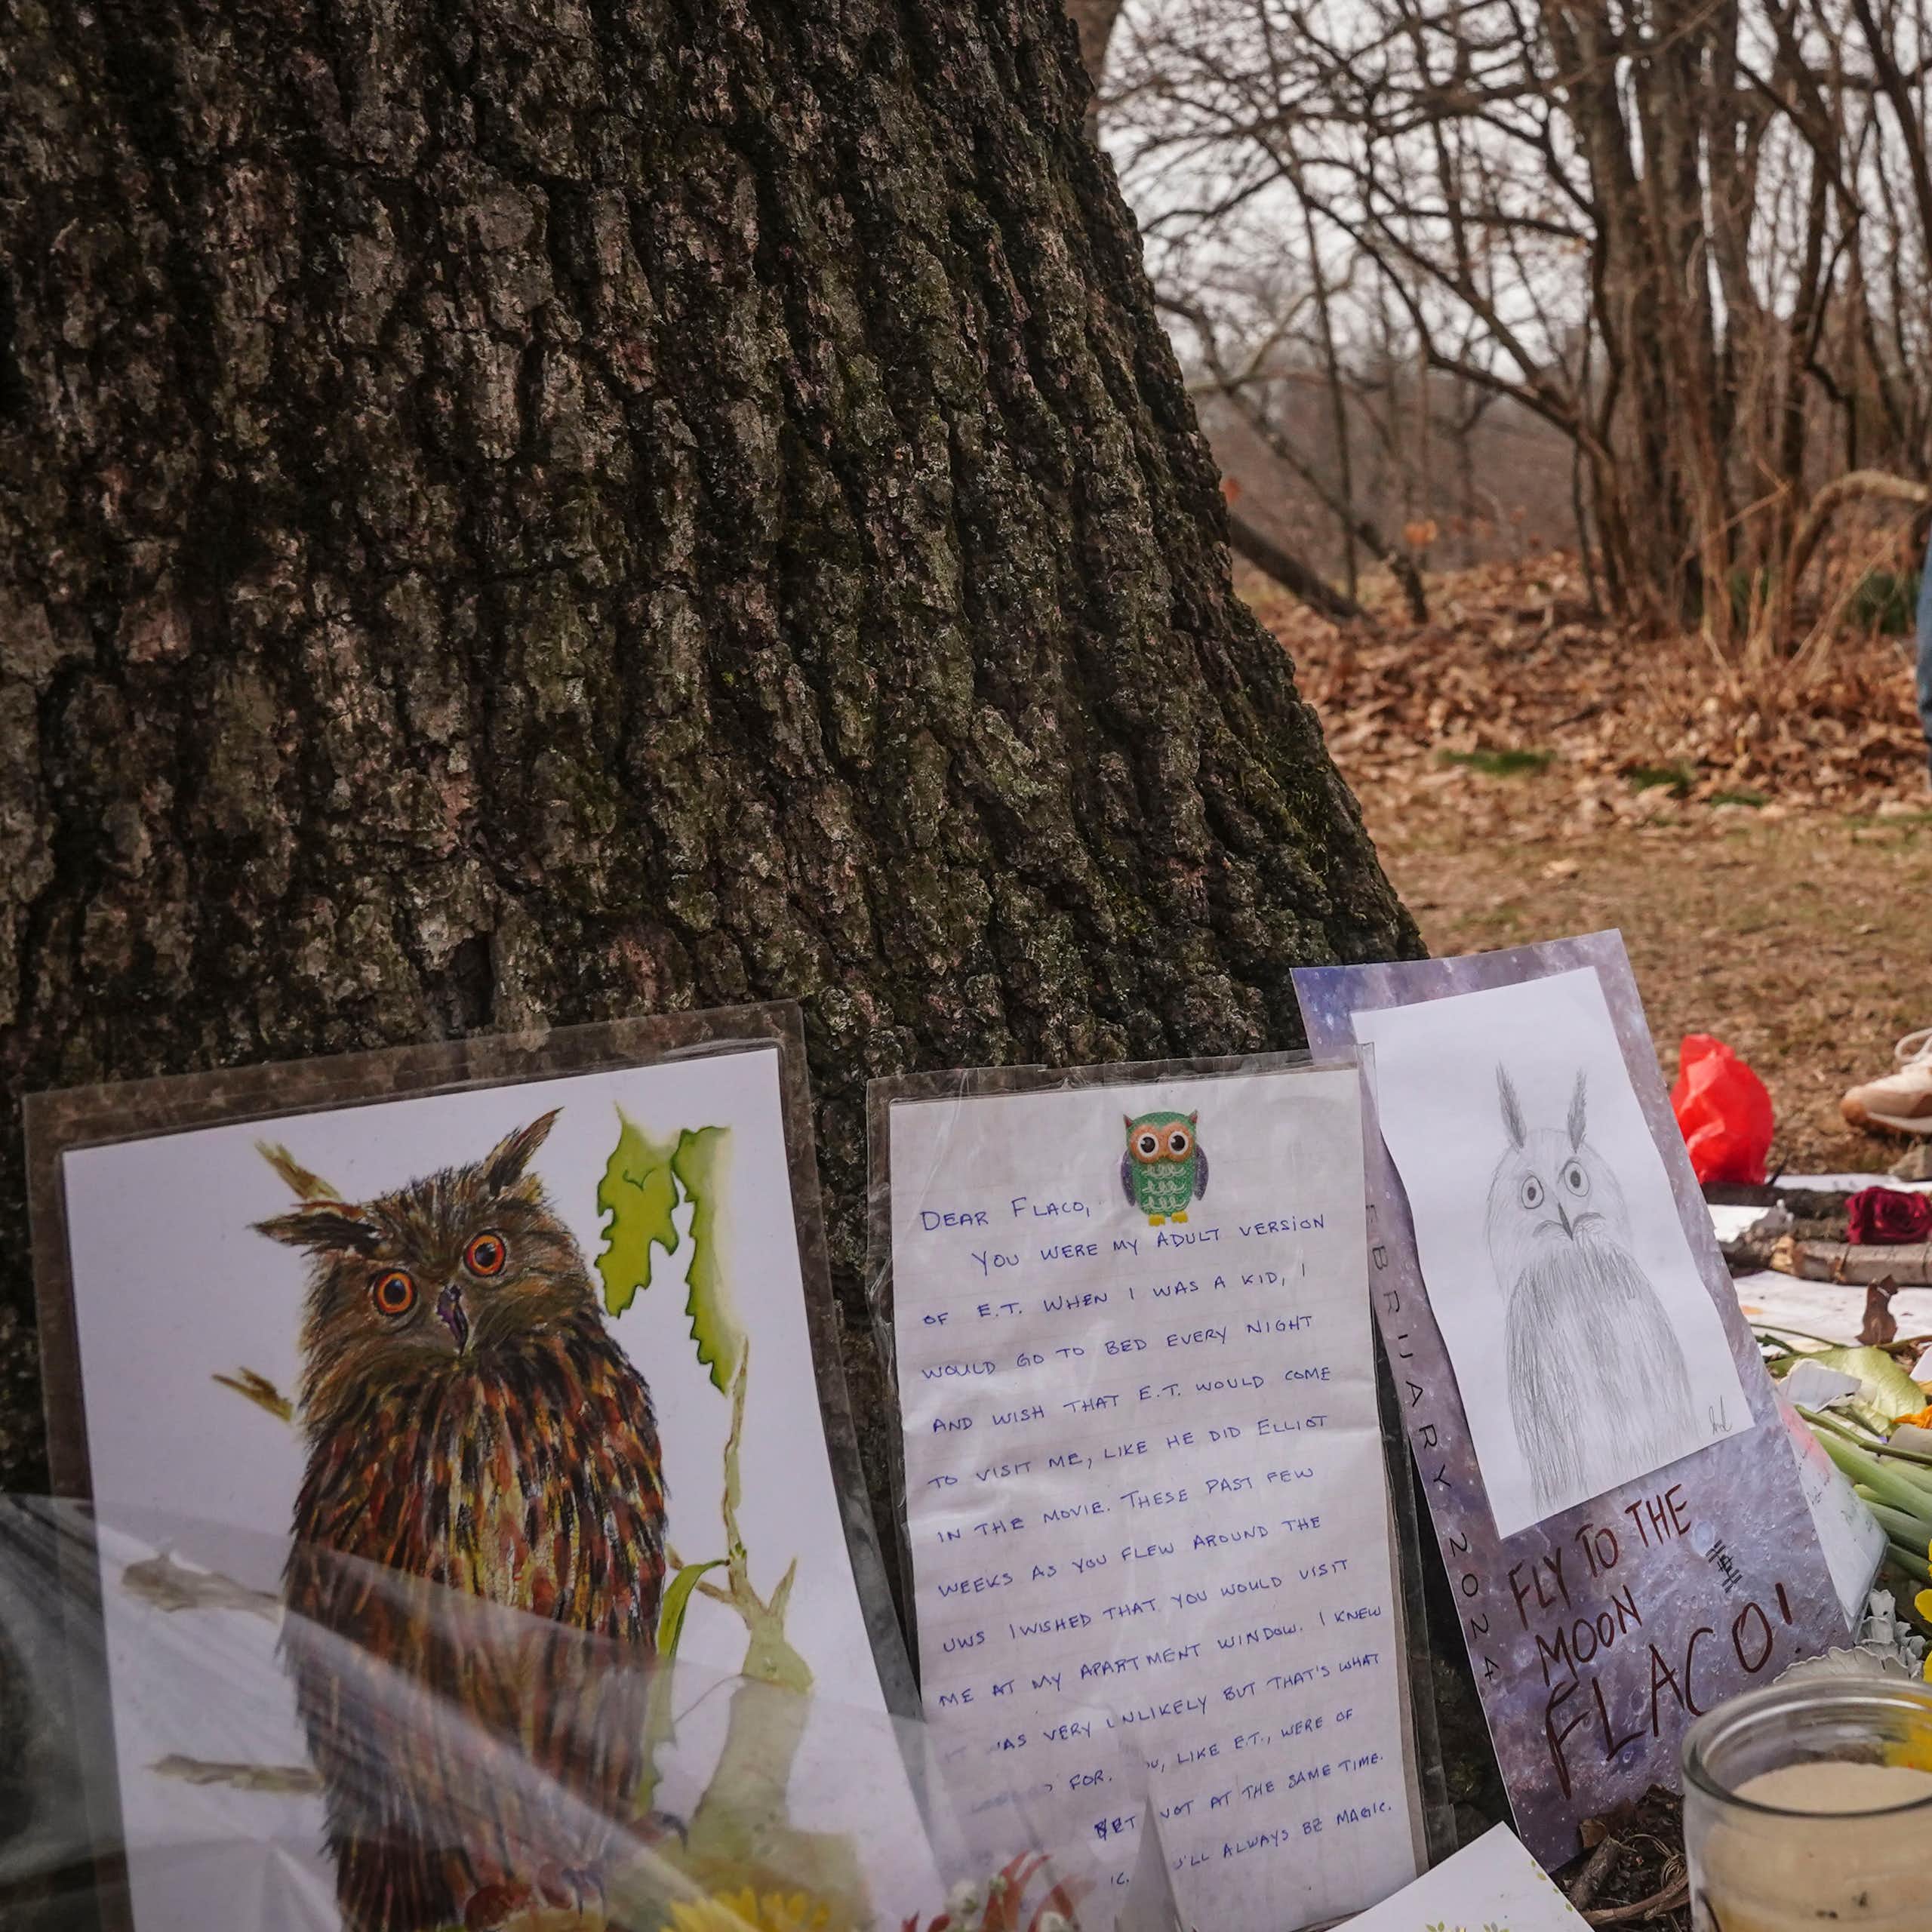 Flowers and candles left as offerings in front of  pictures of an owl, resting against the base of a tree trunk, while a man in dark sunglasses sits nearby.